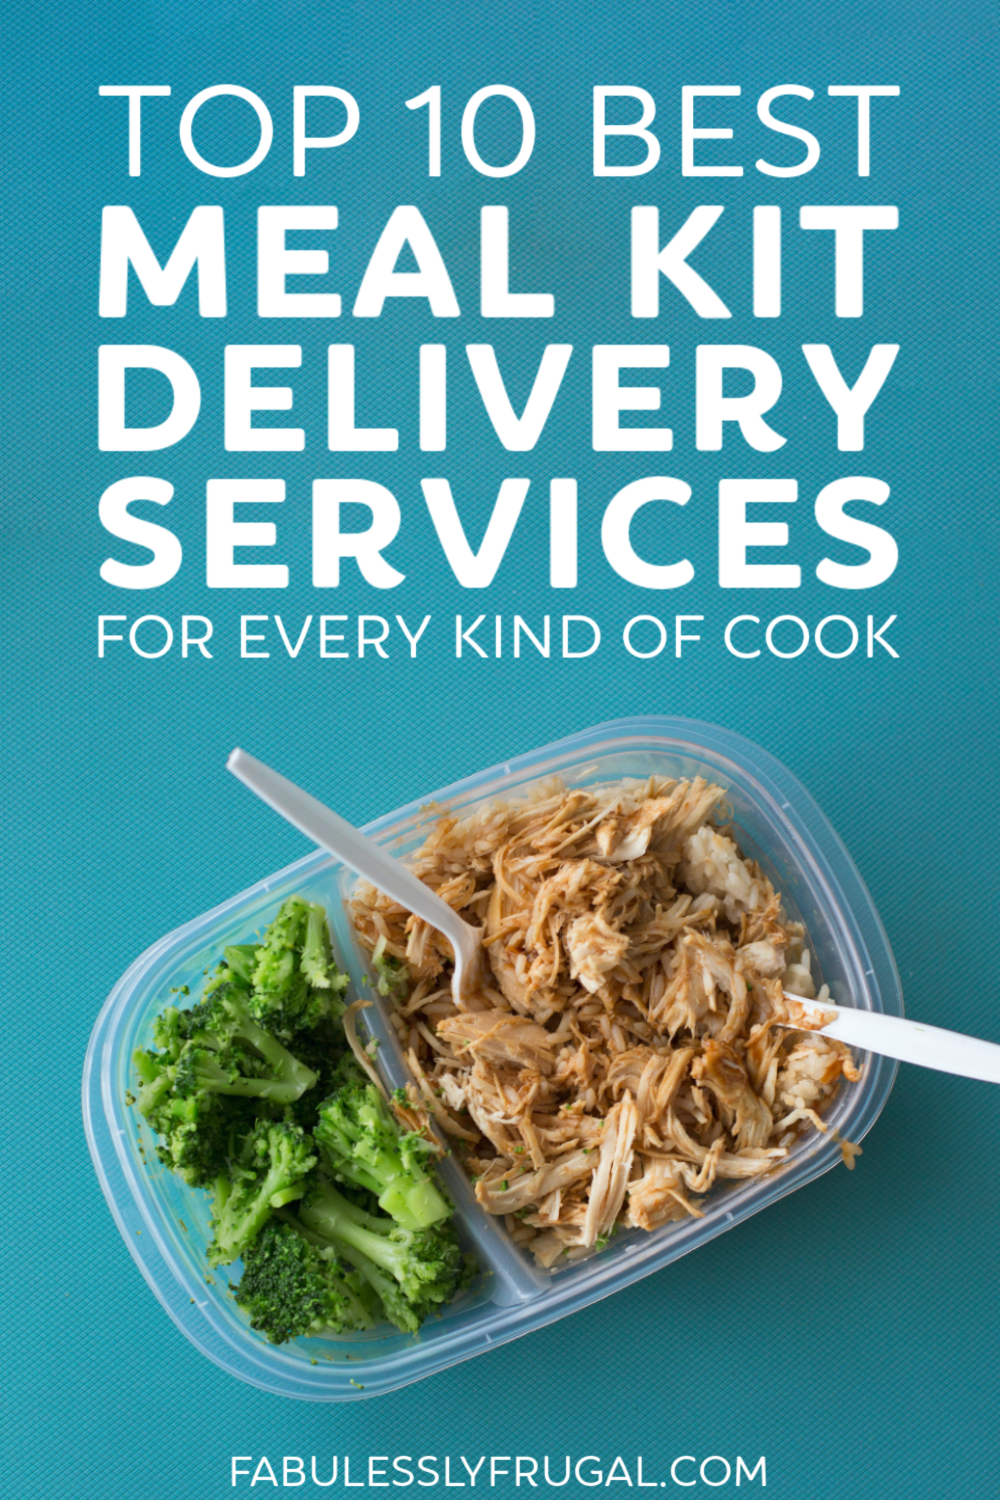 Best meal kit delivery services